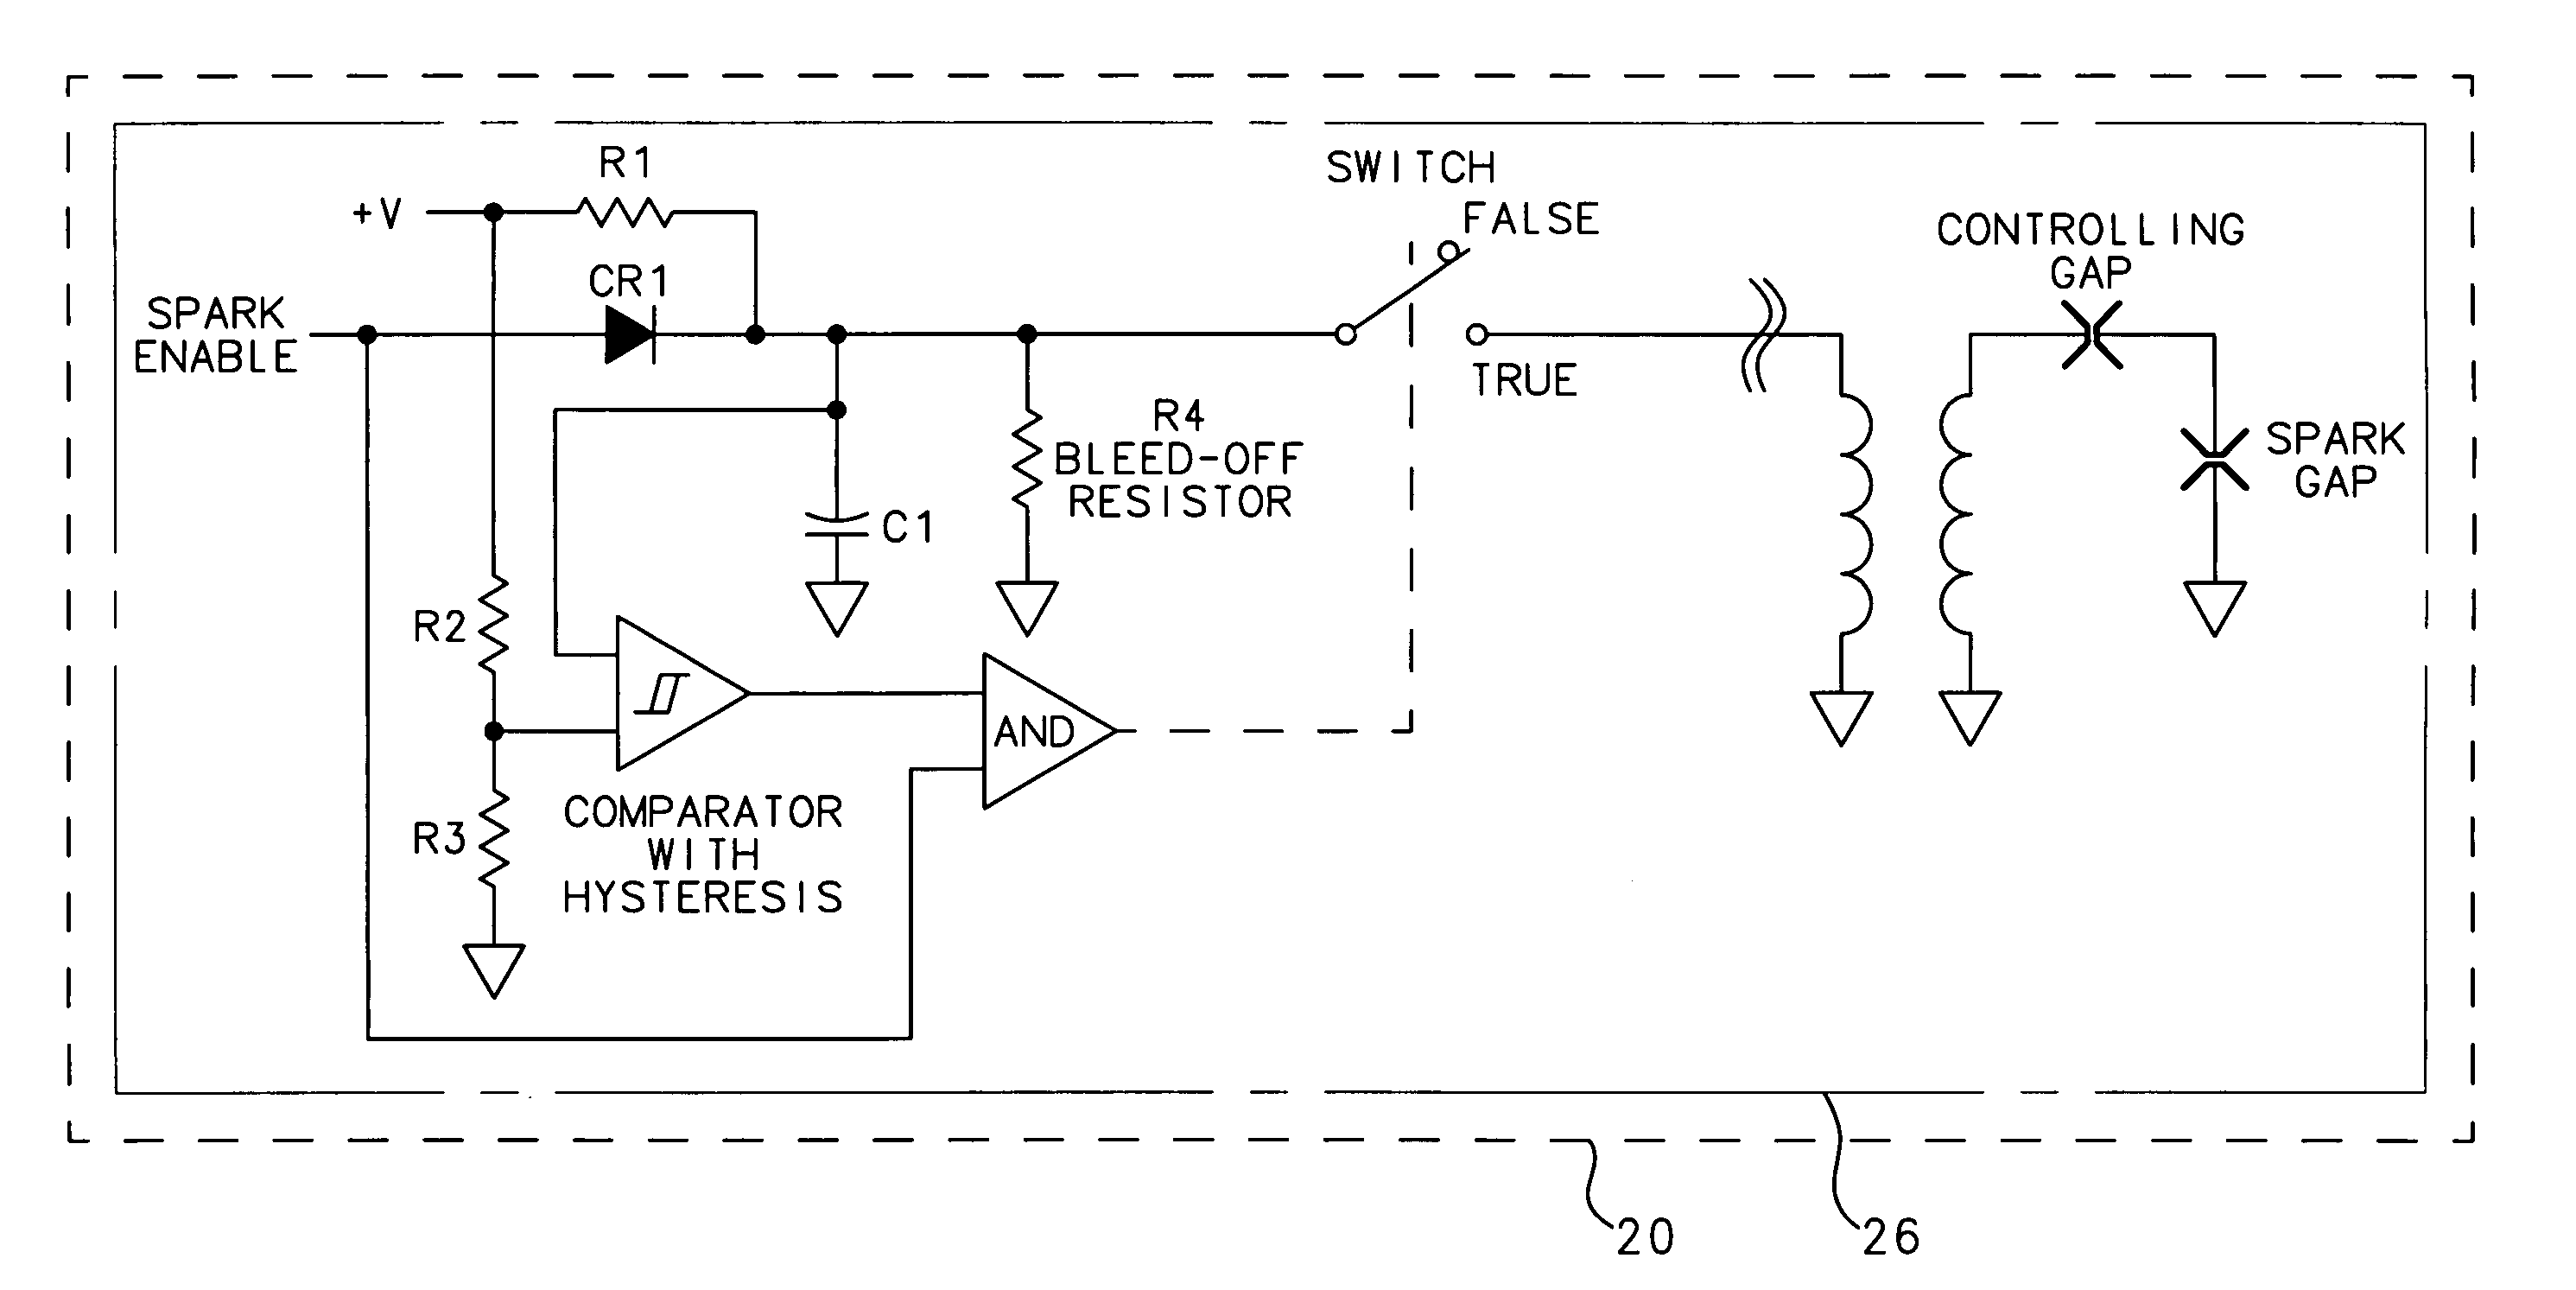 High energy primary spark ignition system for a gas turbine engine